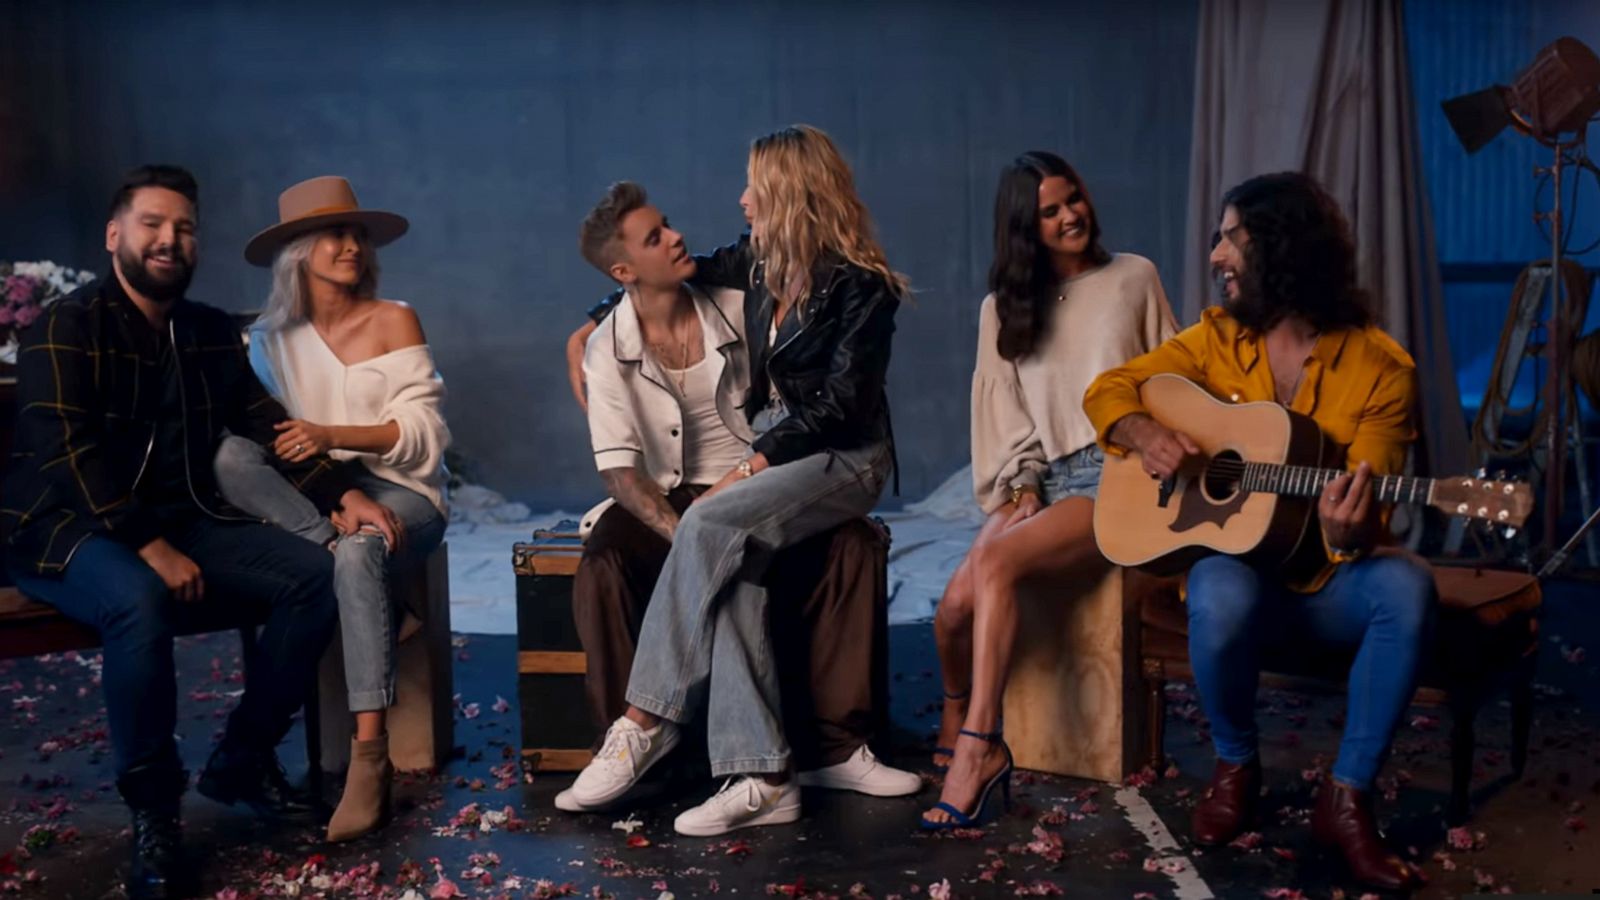 PHOTO: Justin Bieber performs with Dan + Shay in a new music video.